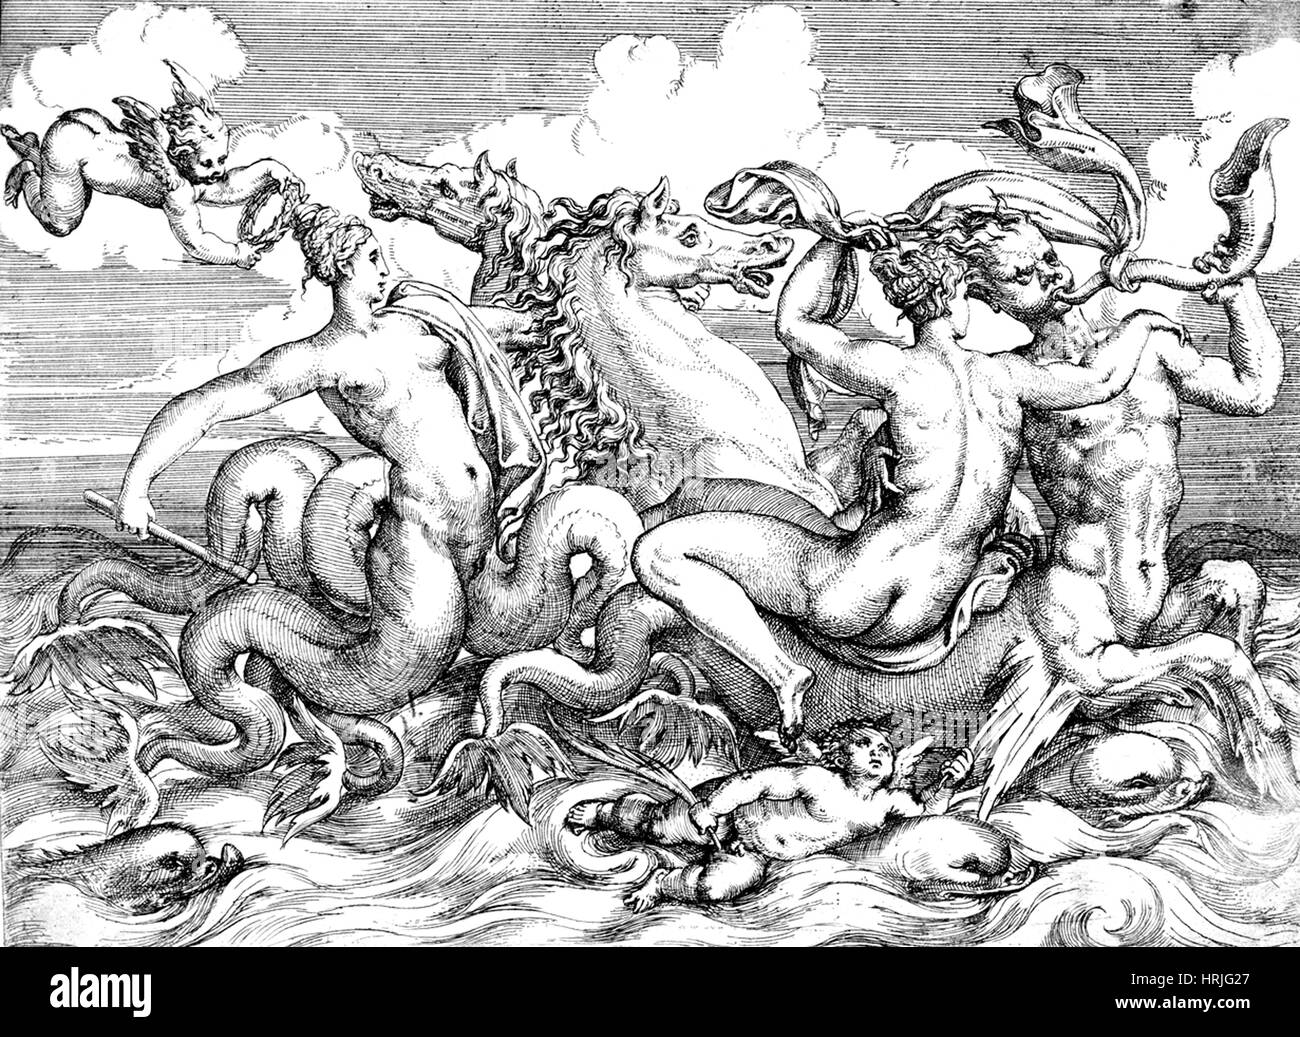 Sirens Naiads and Tritons, Mythological Creatures Stock Photo